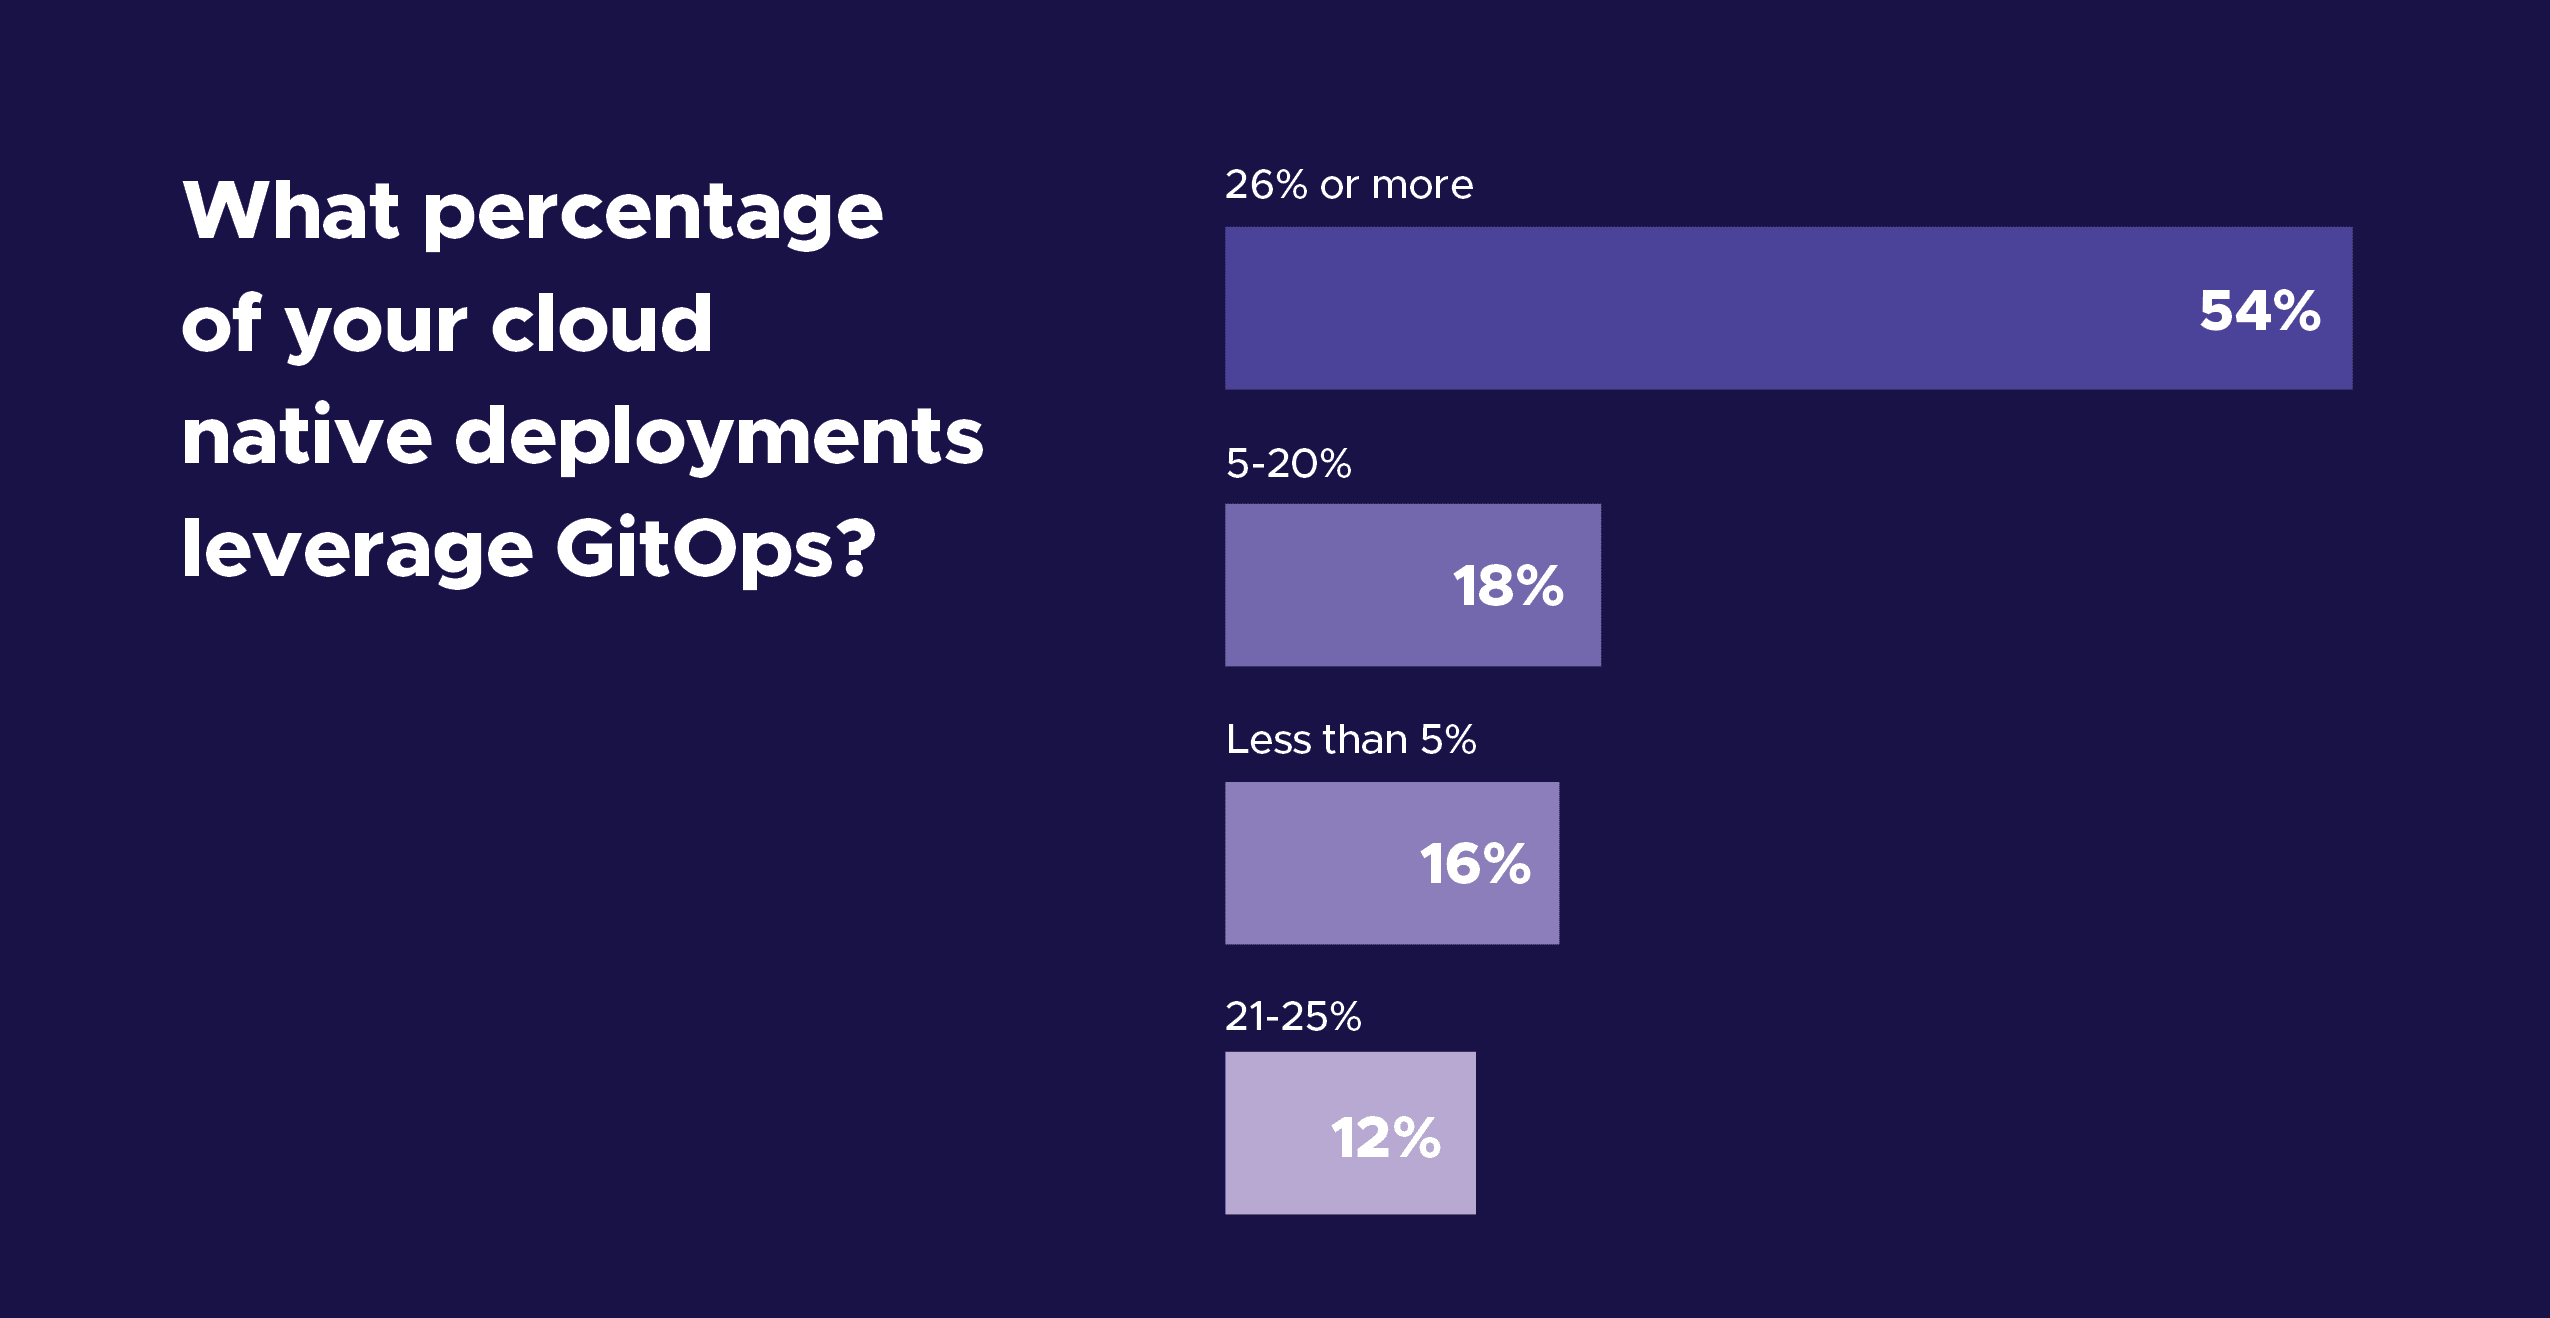 Bar chart showing respondent's respond towards question "What percentage of your cloud native deployments leverage GitOps?" 54% of respondents chose "26% or more" while 12% chose "21-25%)